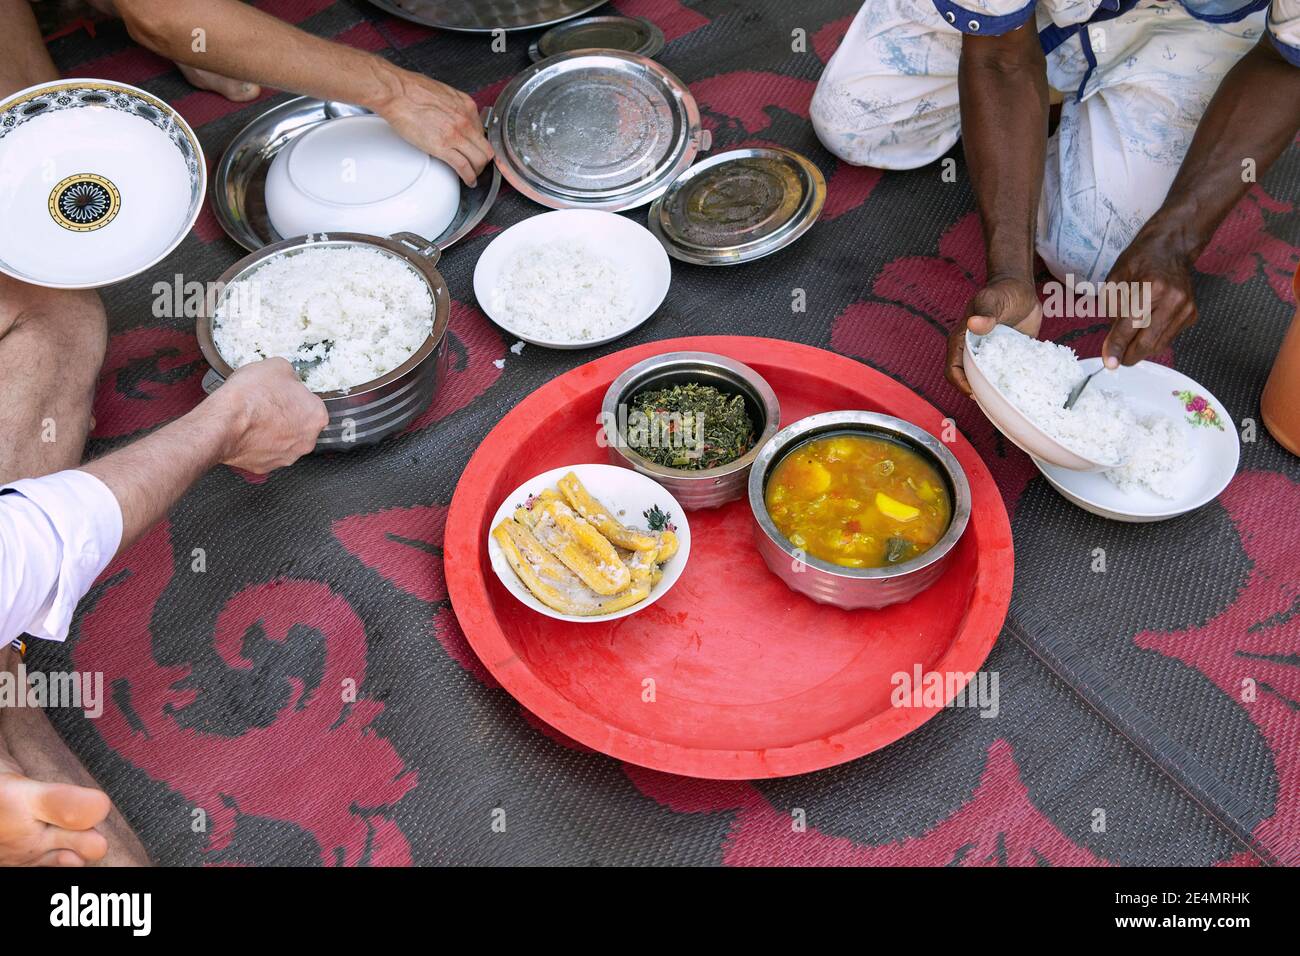 African food on the ground in african village house. People put food on the plate, visible hands. Homemade dishes ready to eat, view from above. Stock Photo